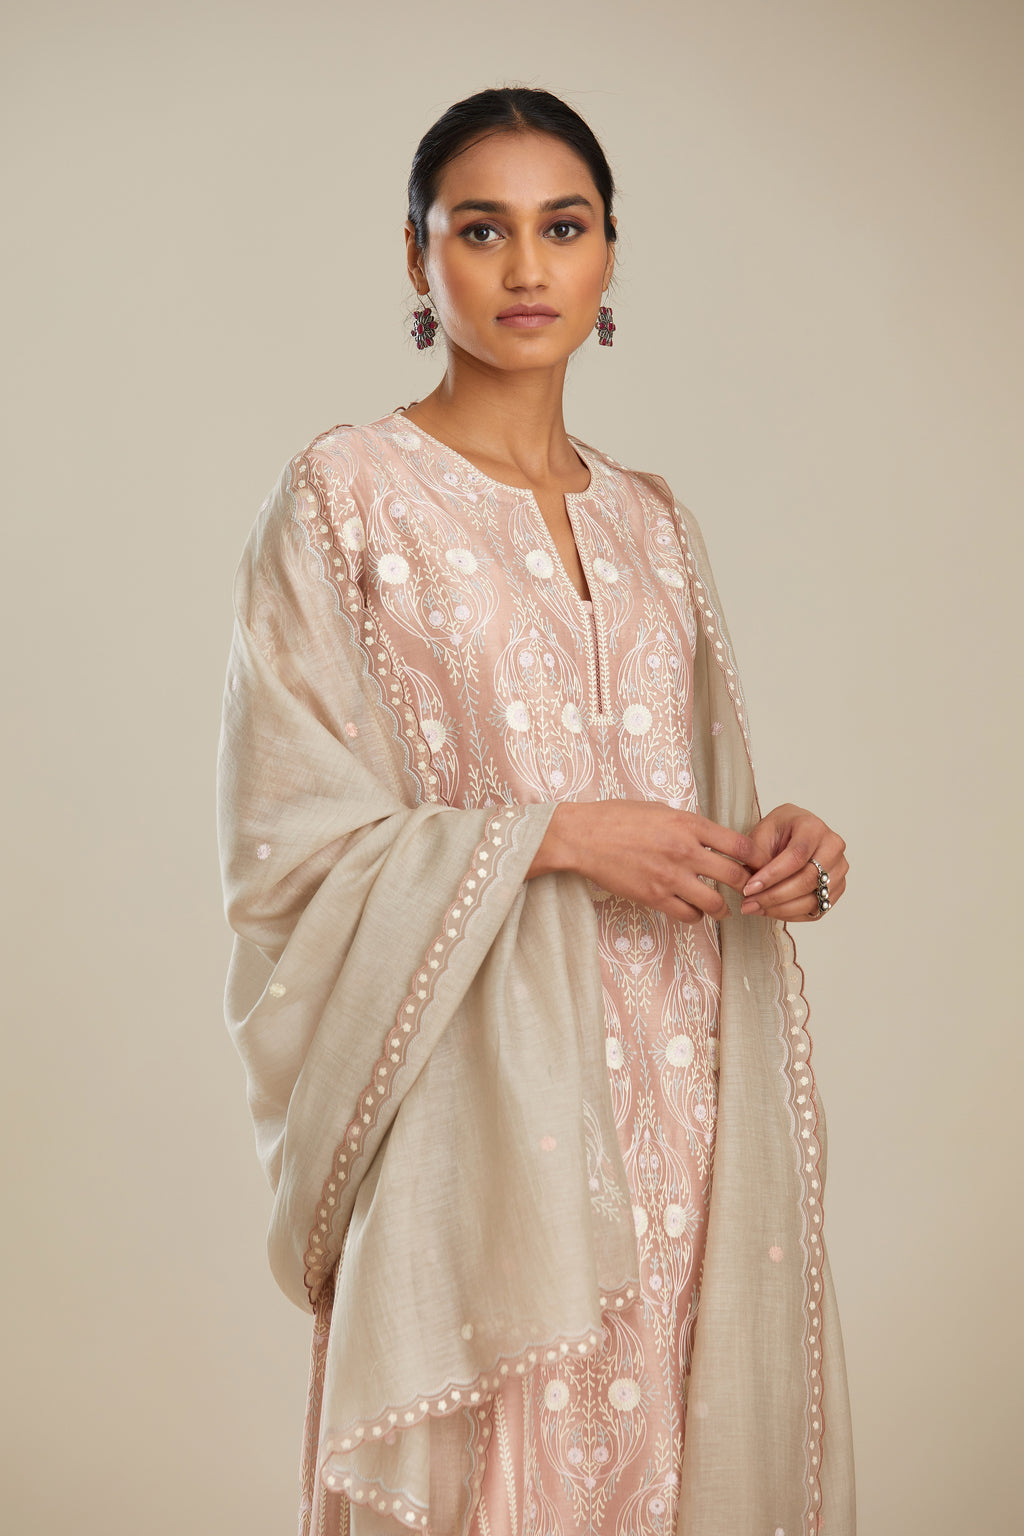 White sand cotton chanderi dupatta with scalloped and embroidered edges.